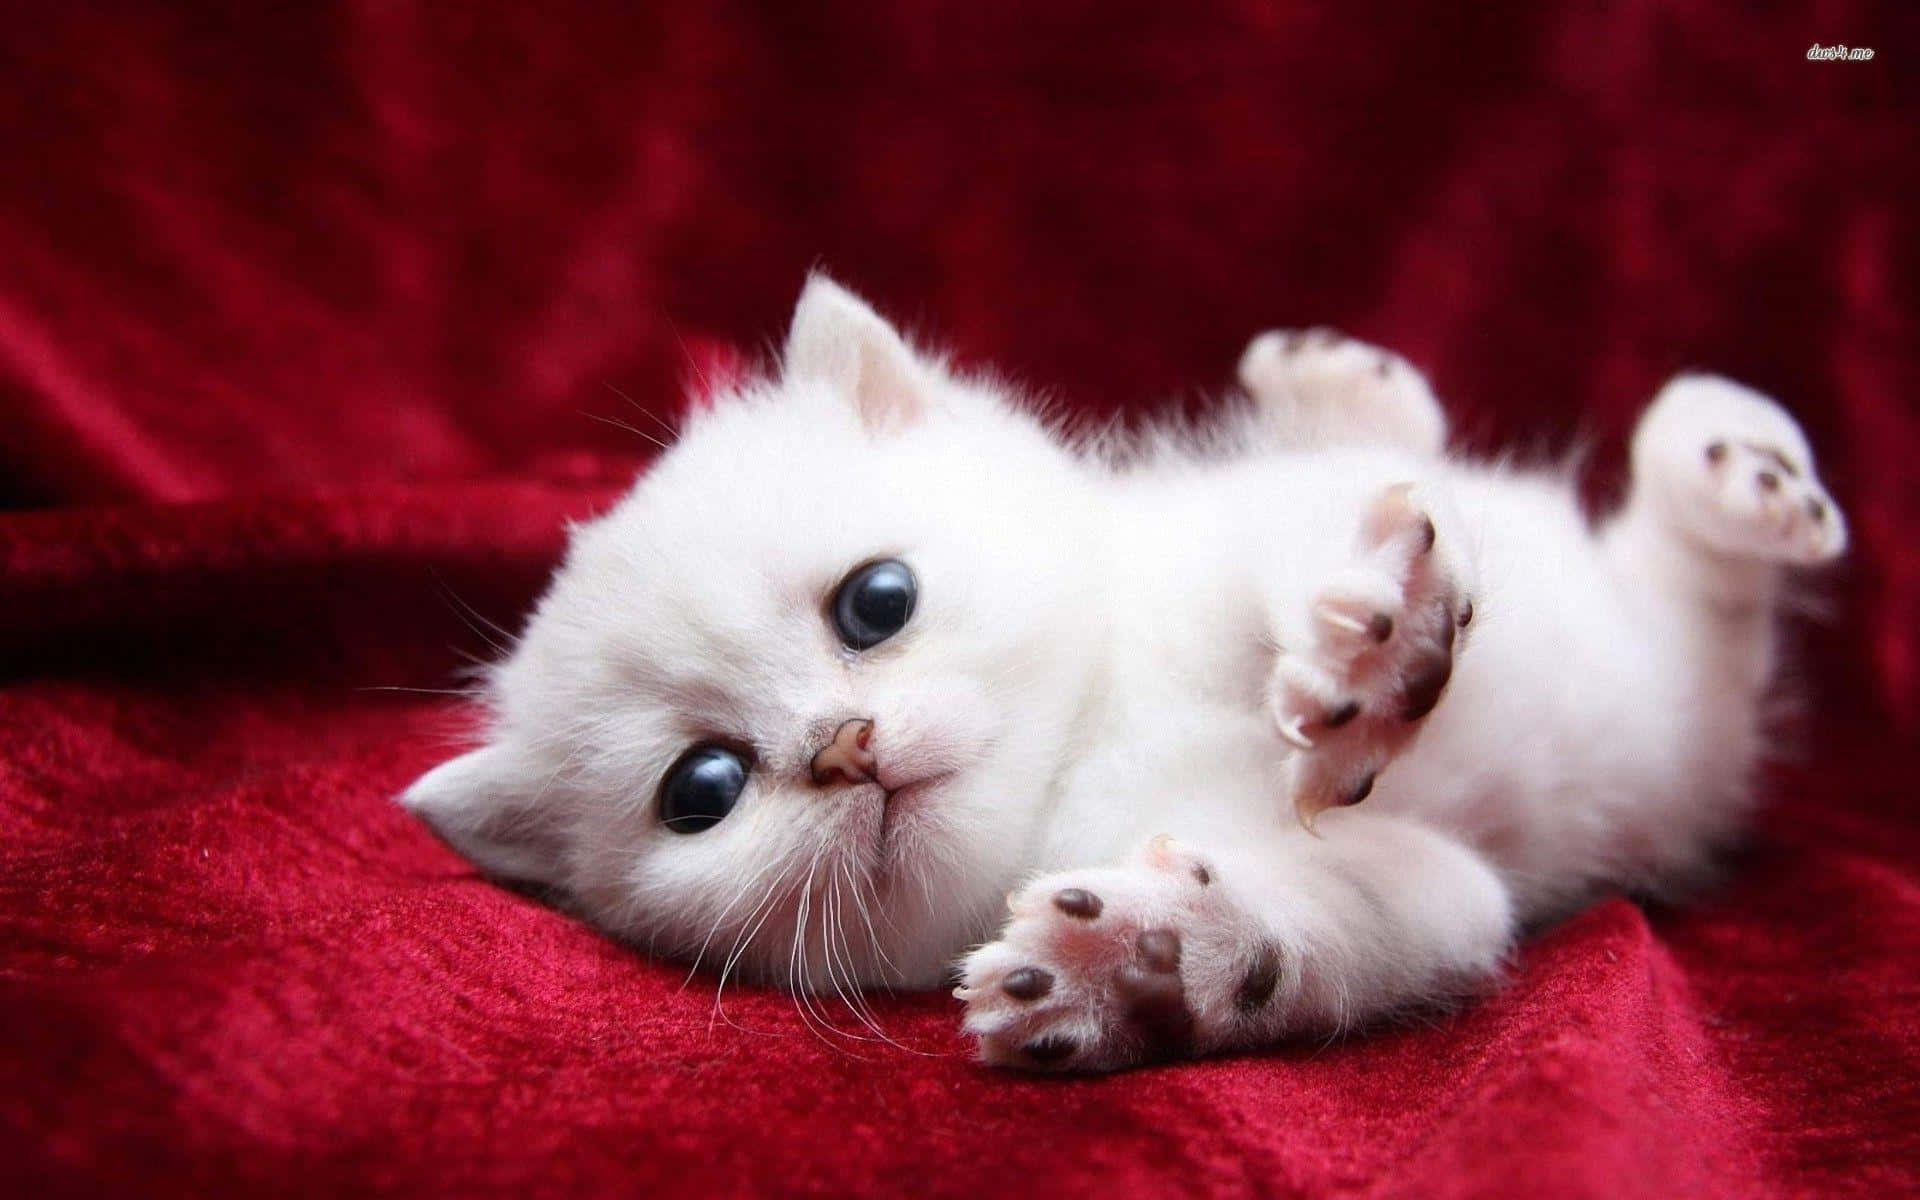 Cute Cat Photos, Download The BEST Free Cute Cat Stock Photos & HD Images